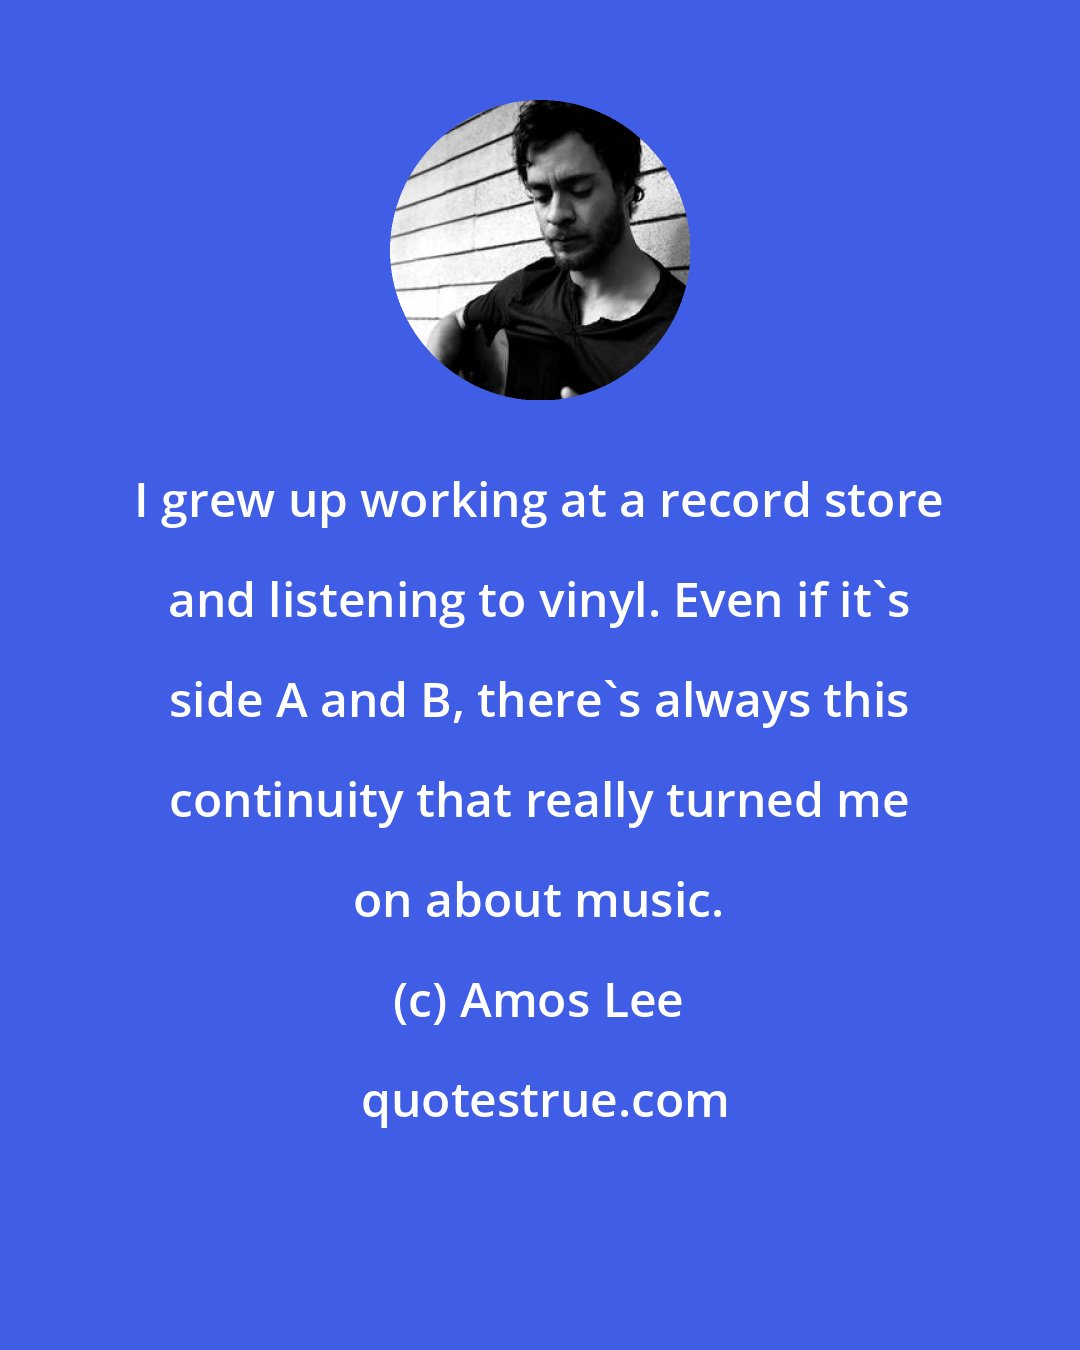 Amos Lee: I grew up working at a record store and listening to vinyl. Even if it's side A and B, there's always this continuity that really turned me on about music.